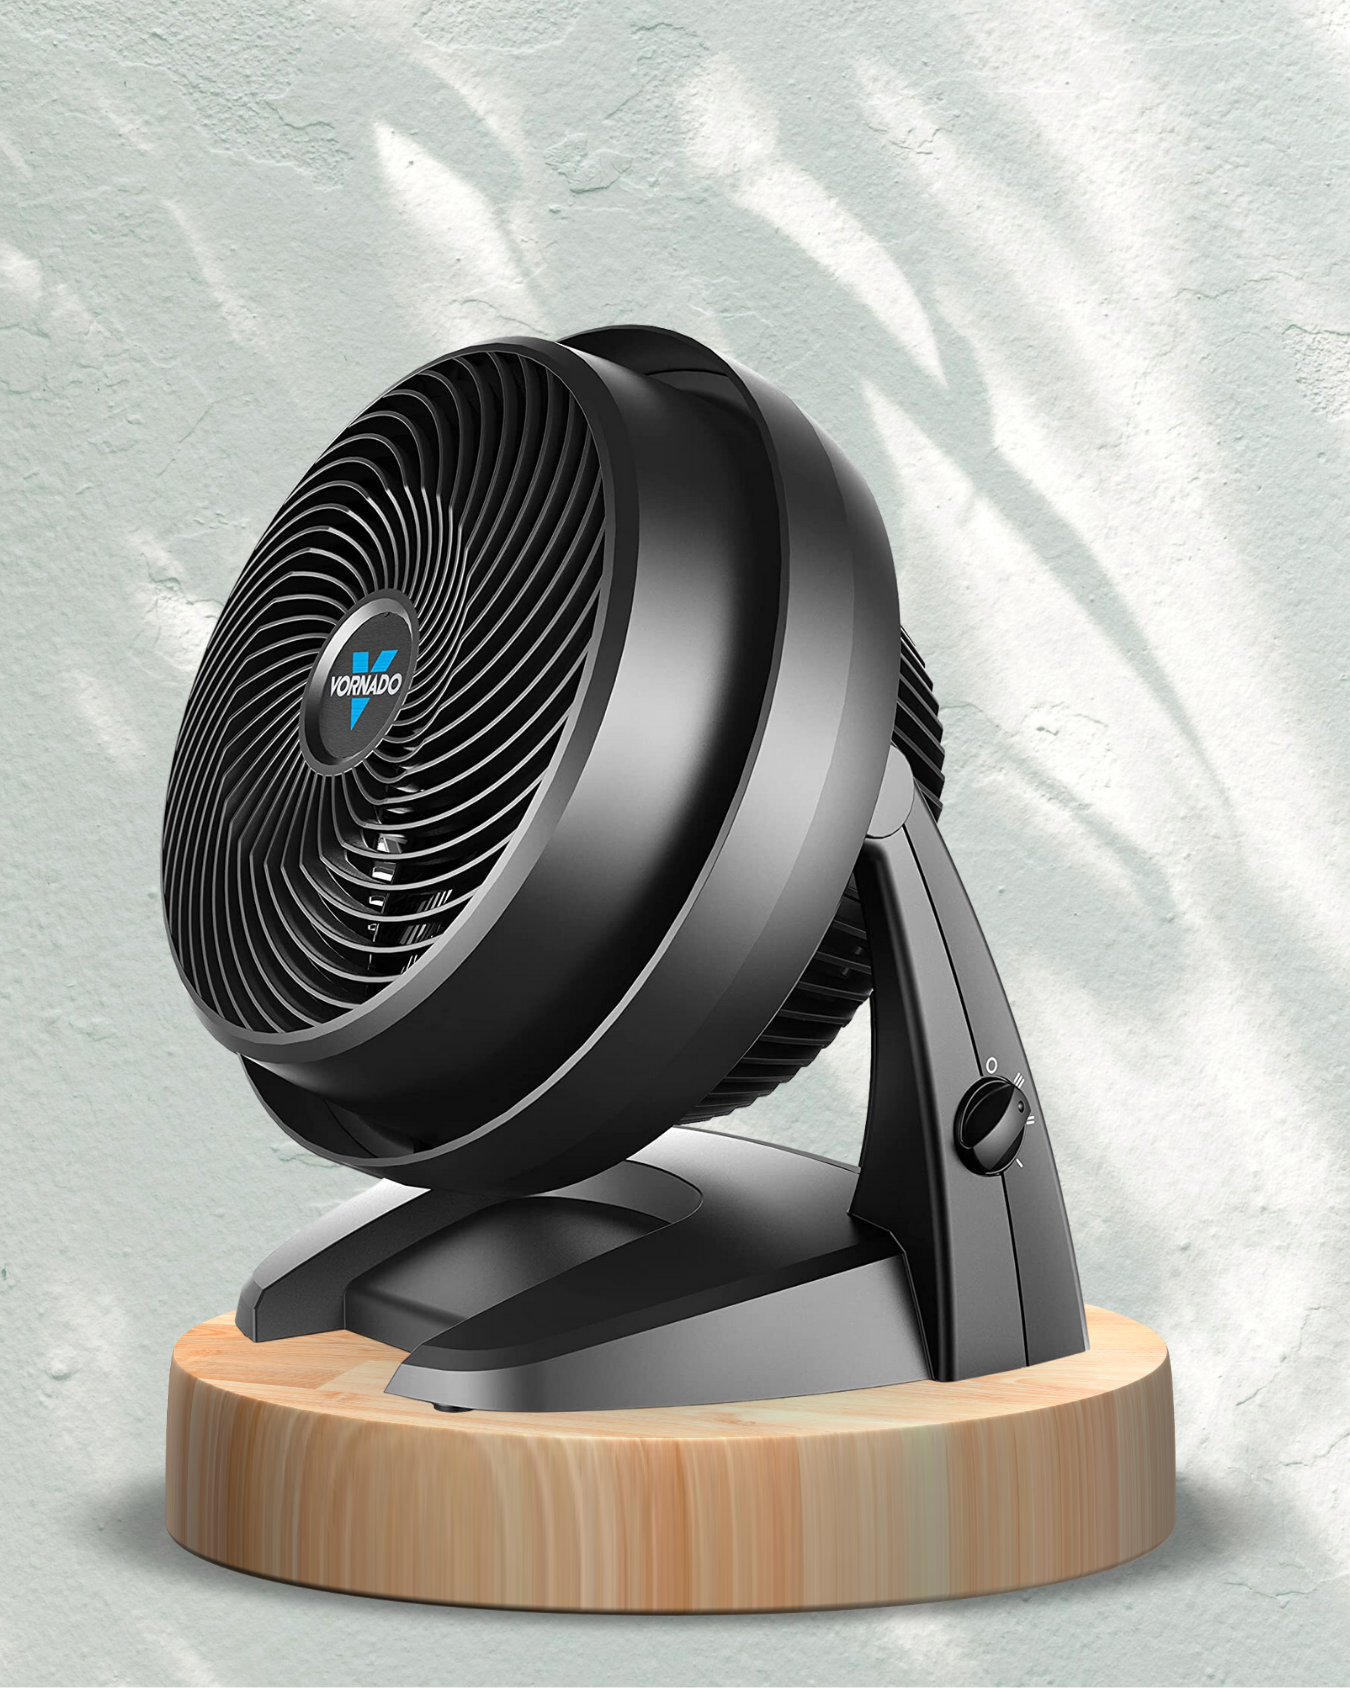 Top 5 Silent Cooling Fans That Will Keep You Cool